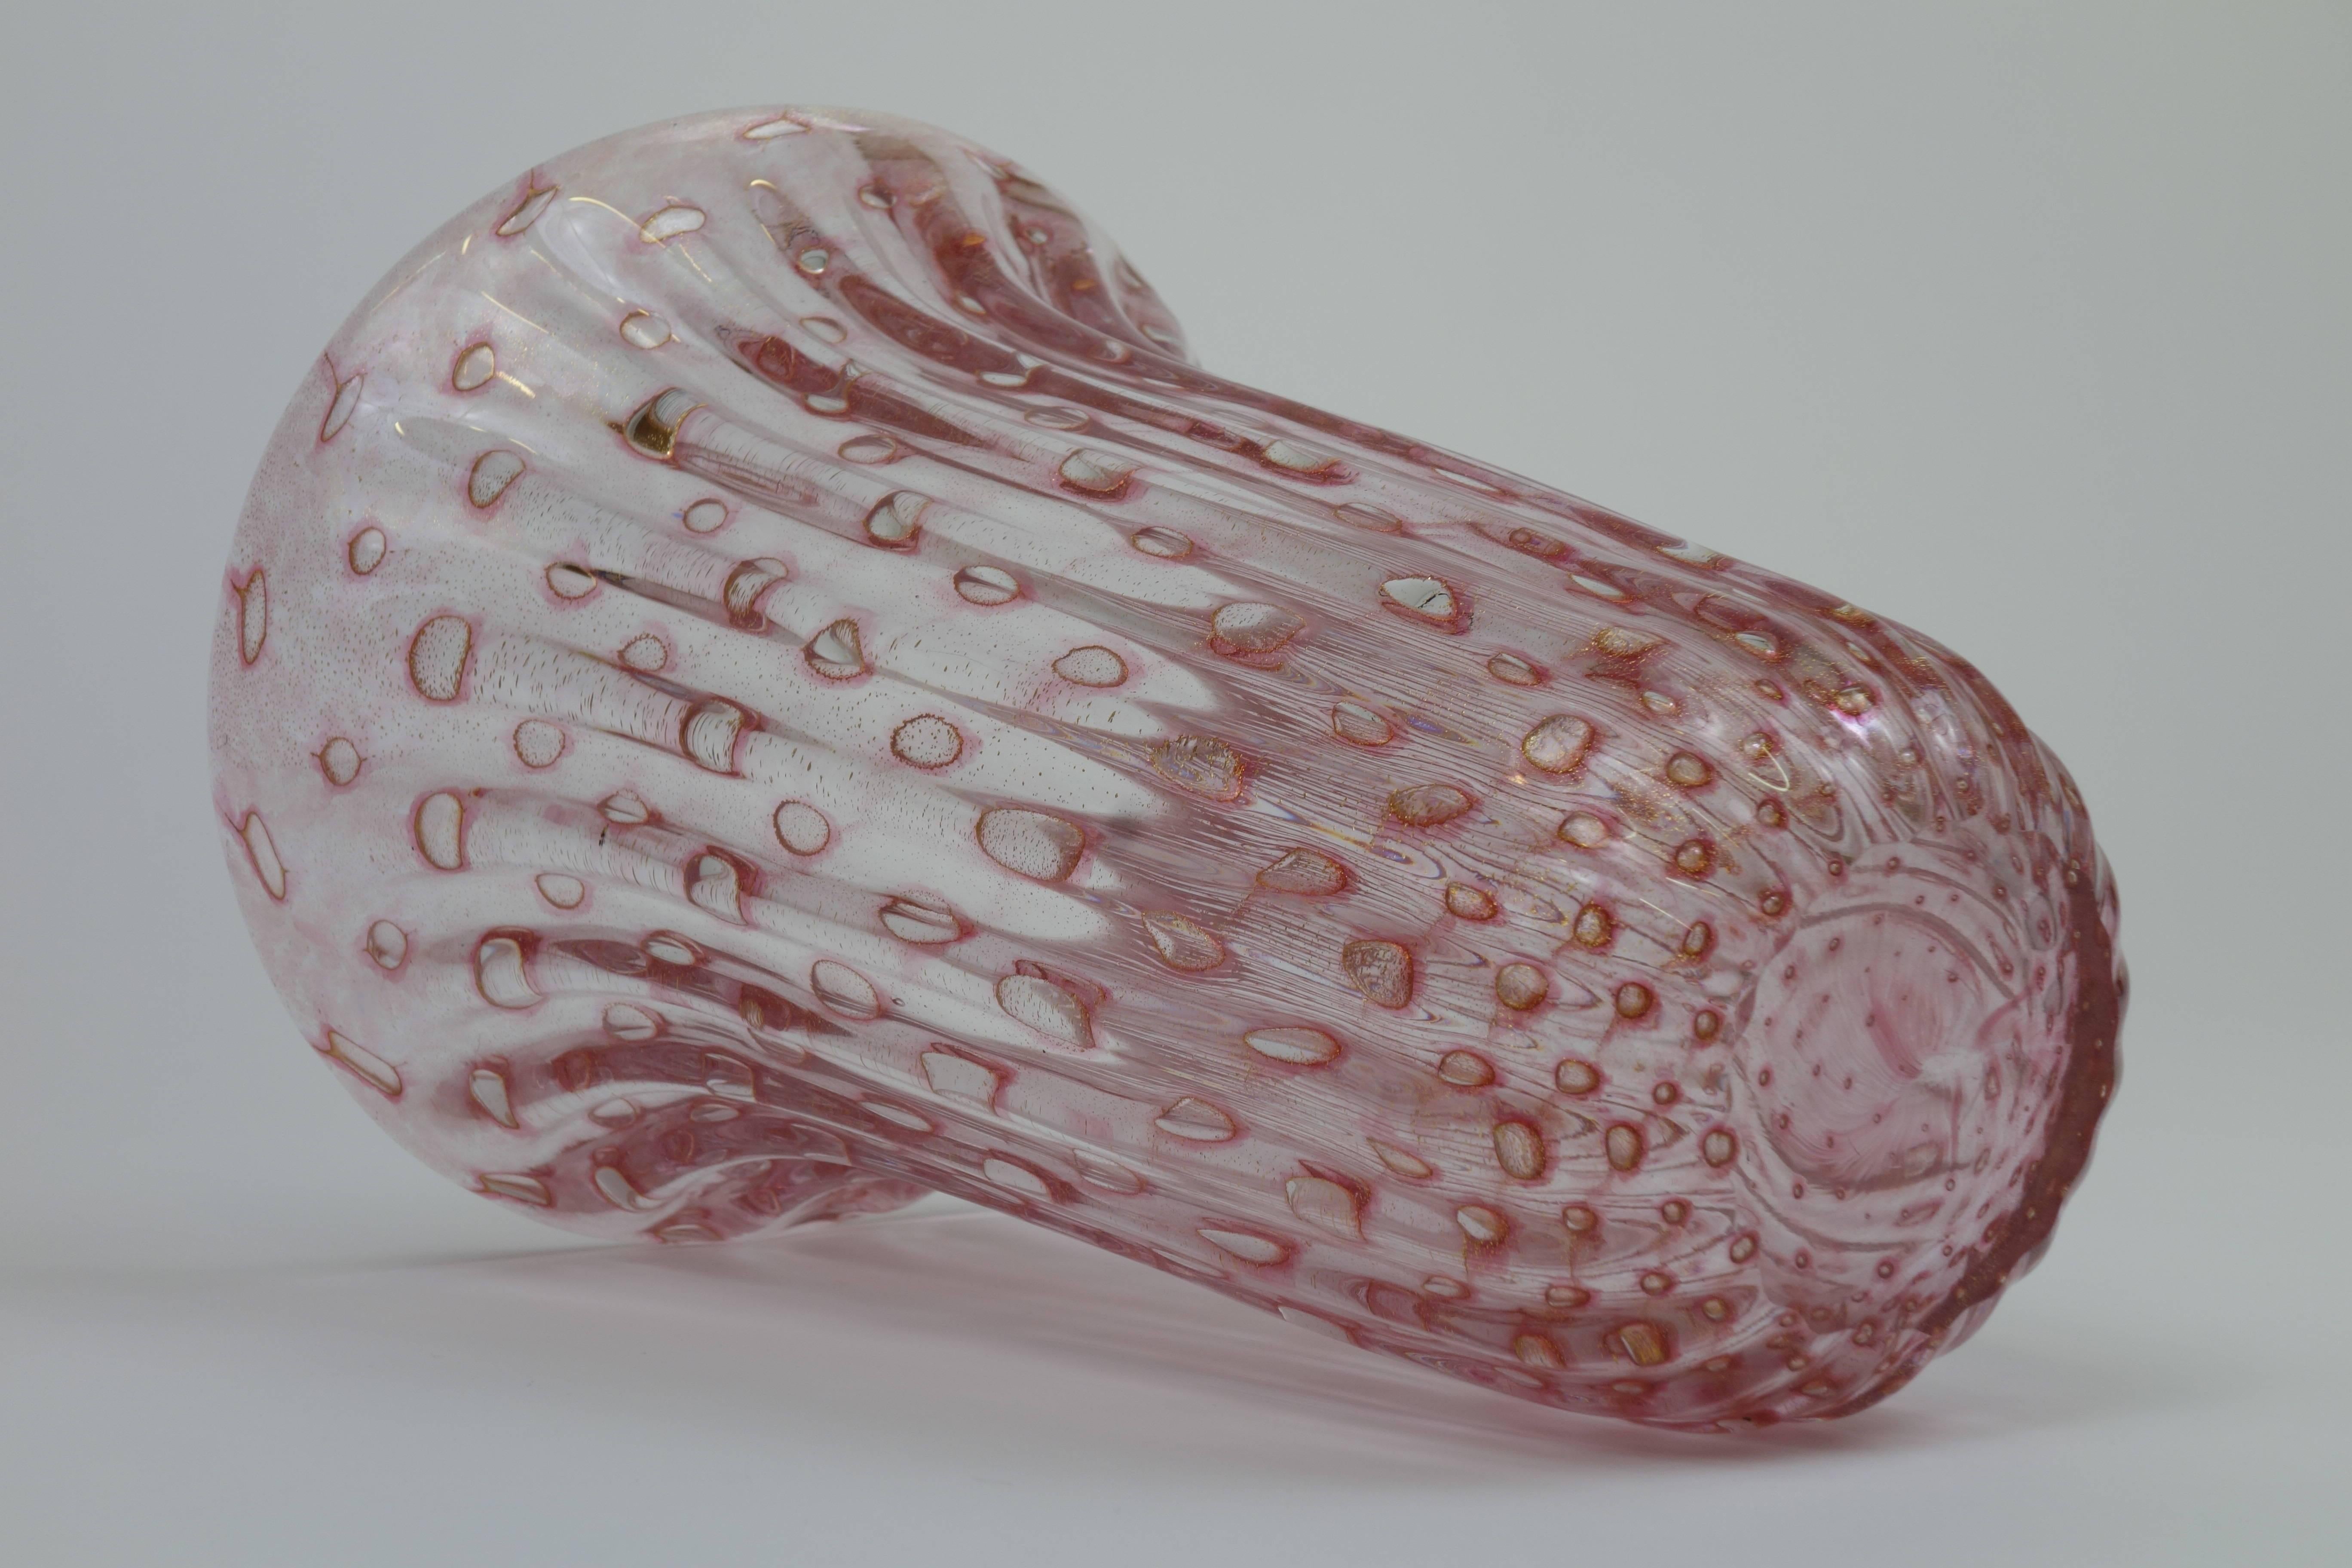 Handblown fluted Murano glass vase by Fratelli Toso, Italy, 1952. Dusky pink body bearing iridescent air bubble inclusions with 24-karat gold polvera d'oro flecks.